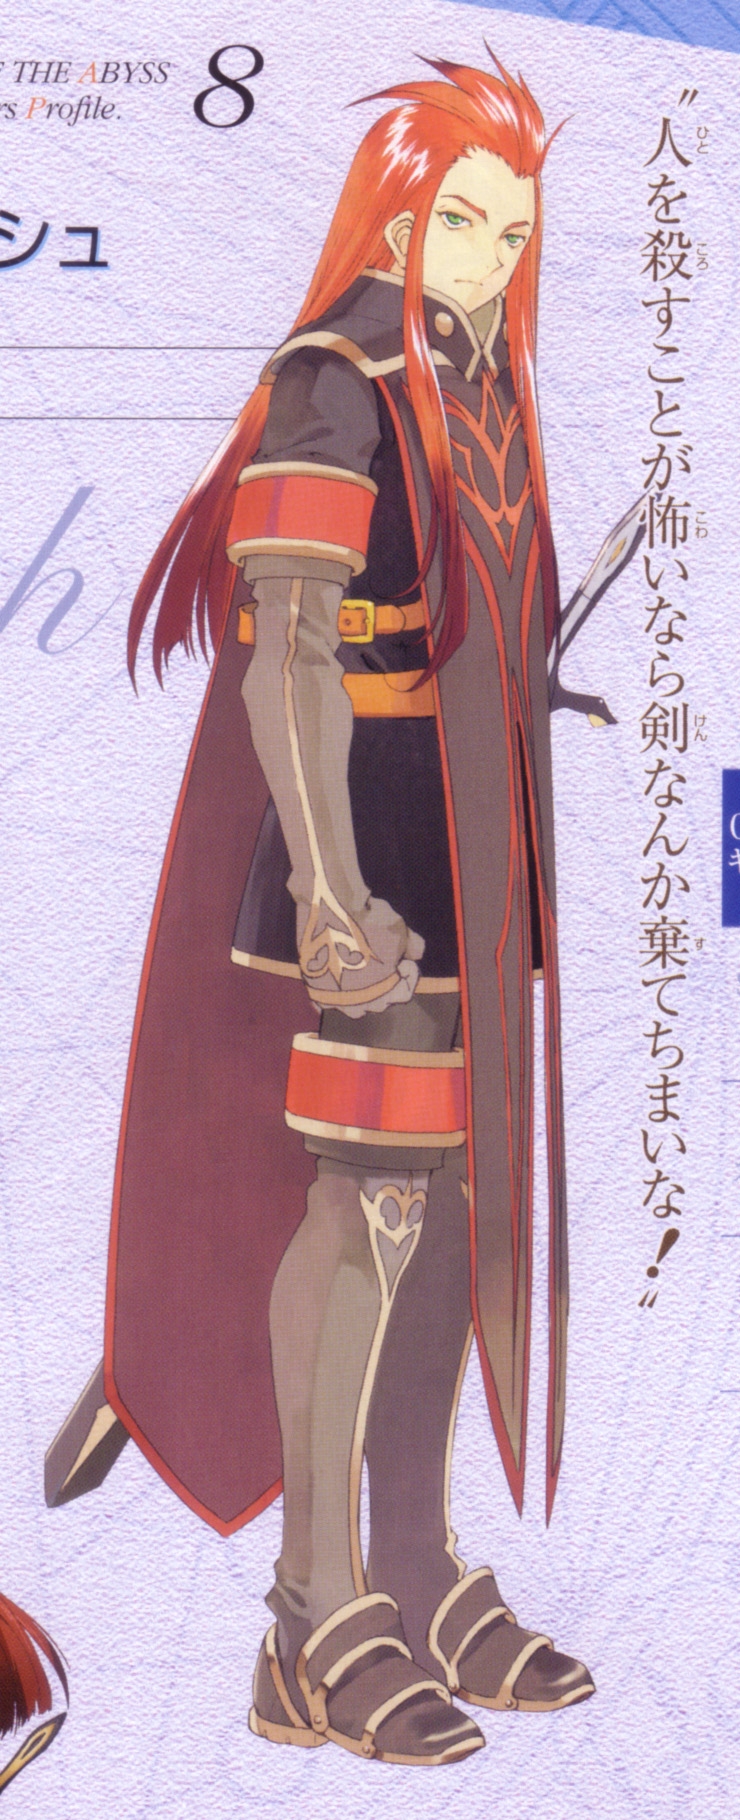 Tales of Abyss Artbook 8